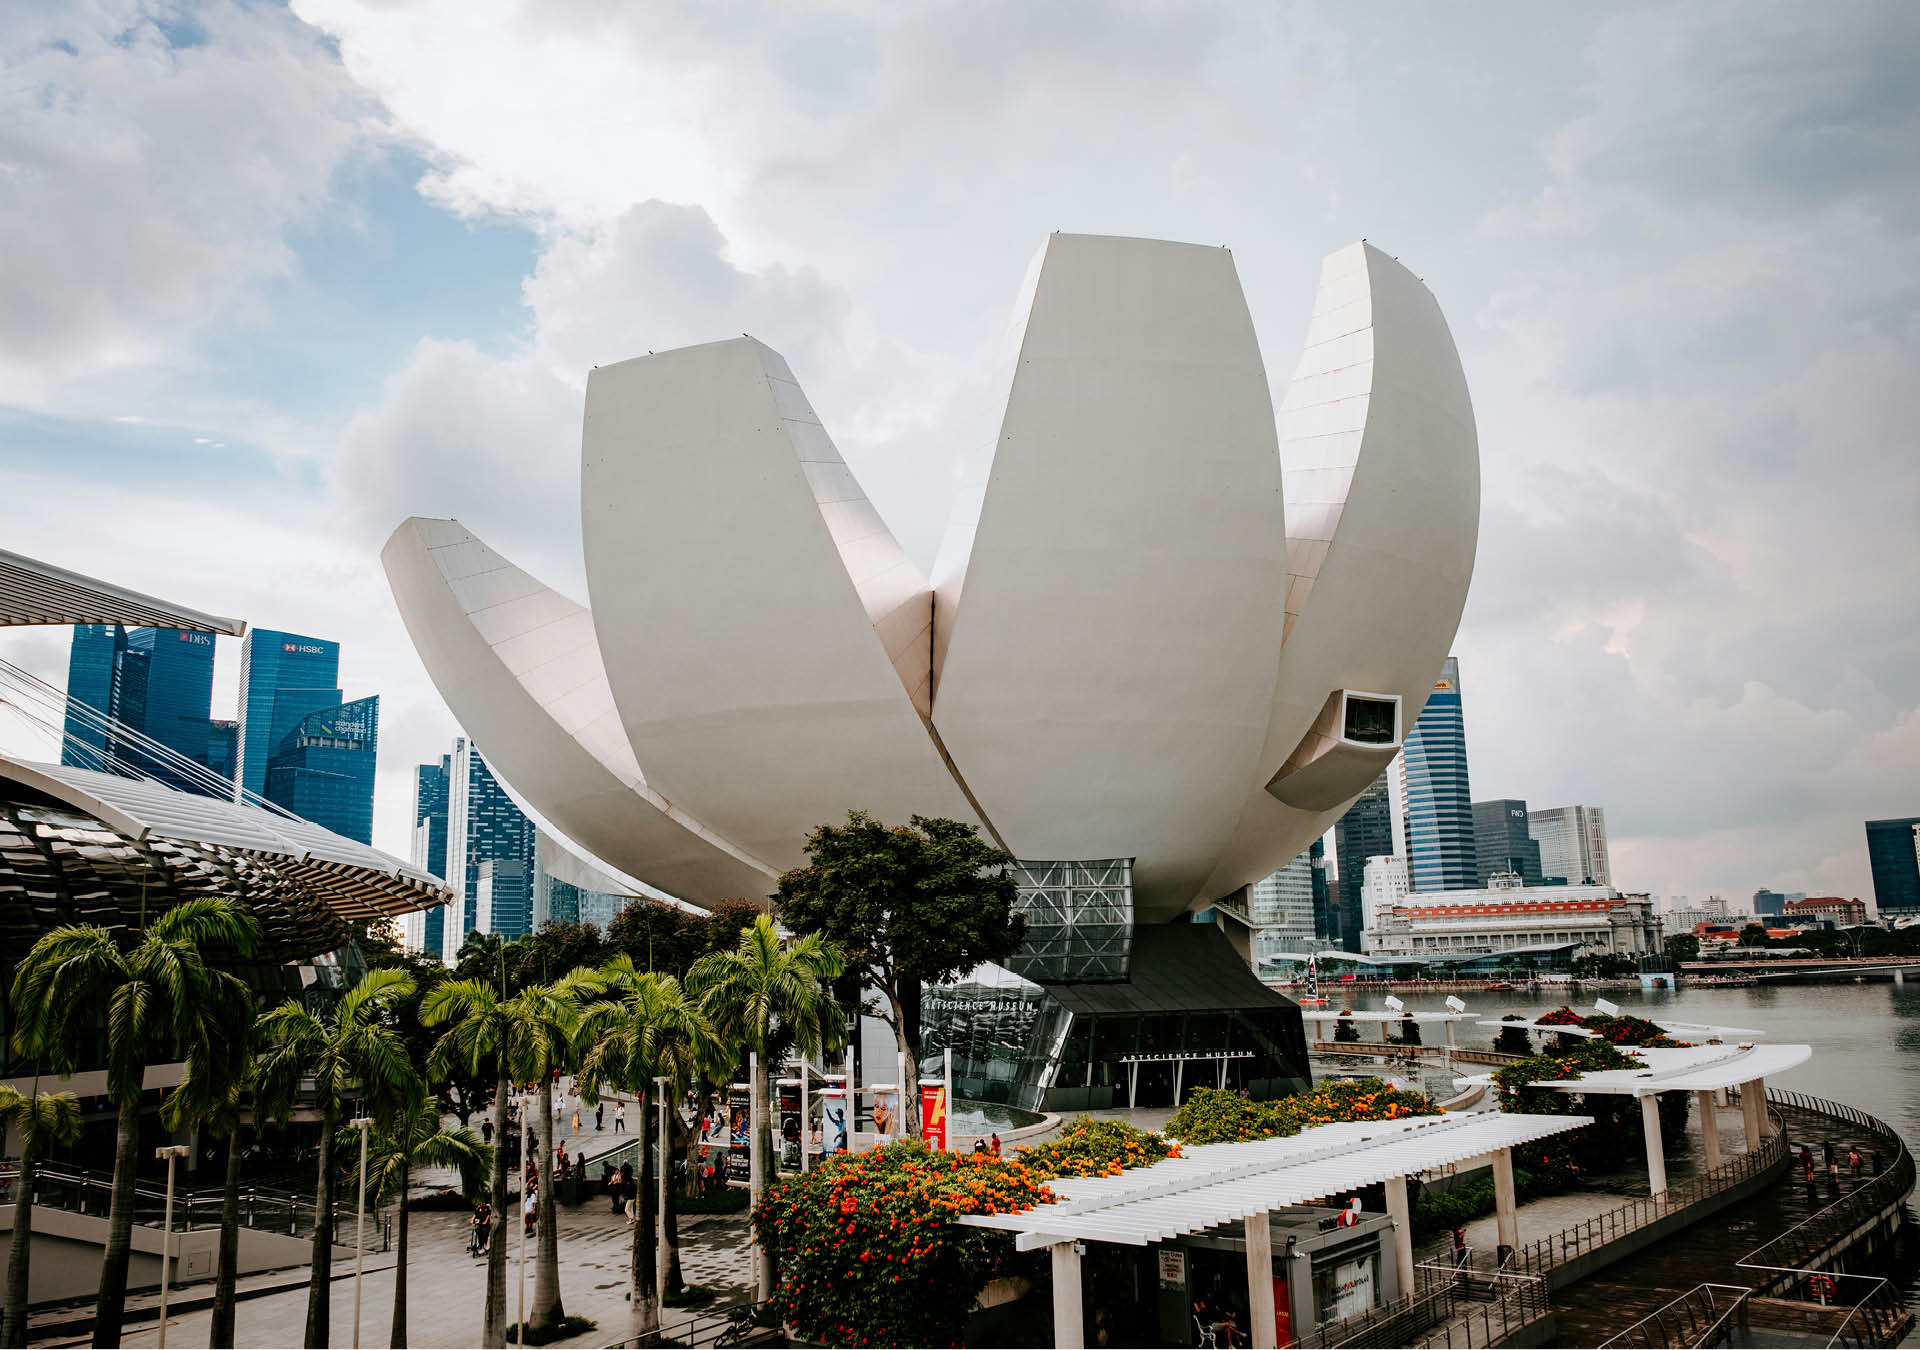 The facade of ArtScience Museum in Singapore against a blue and white sky.